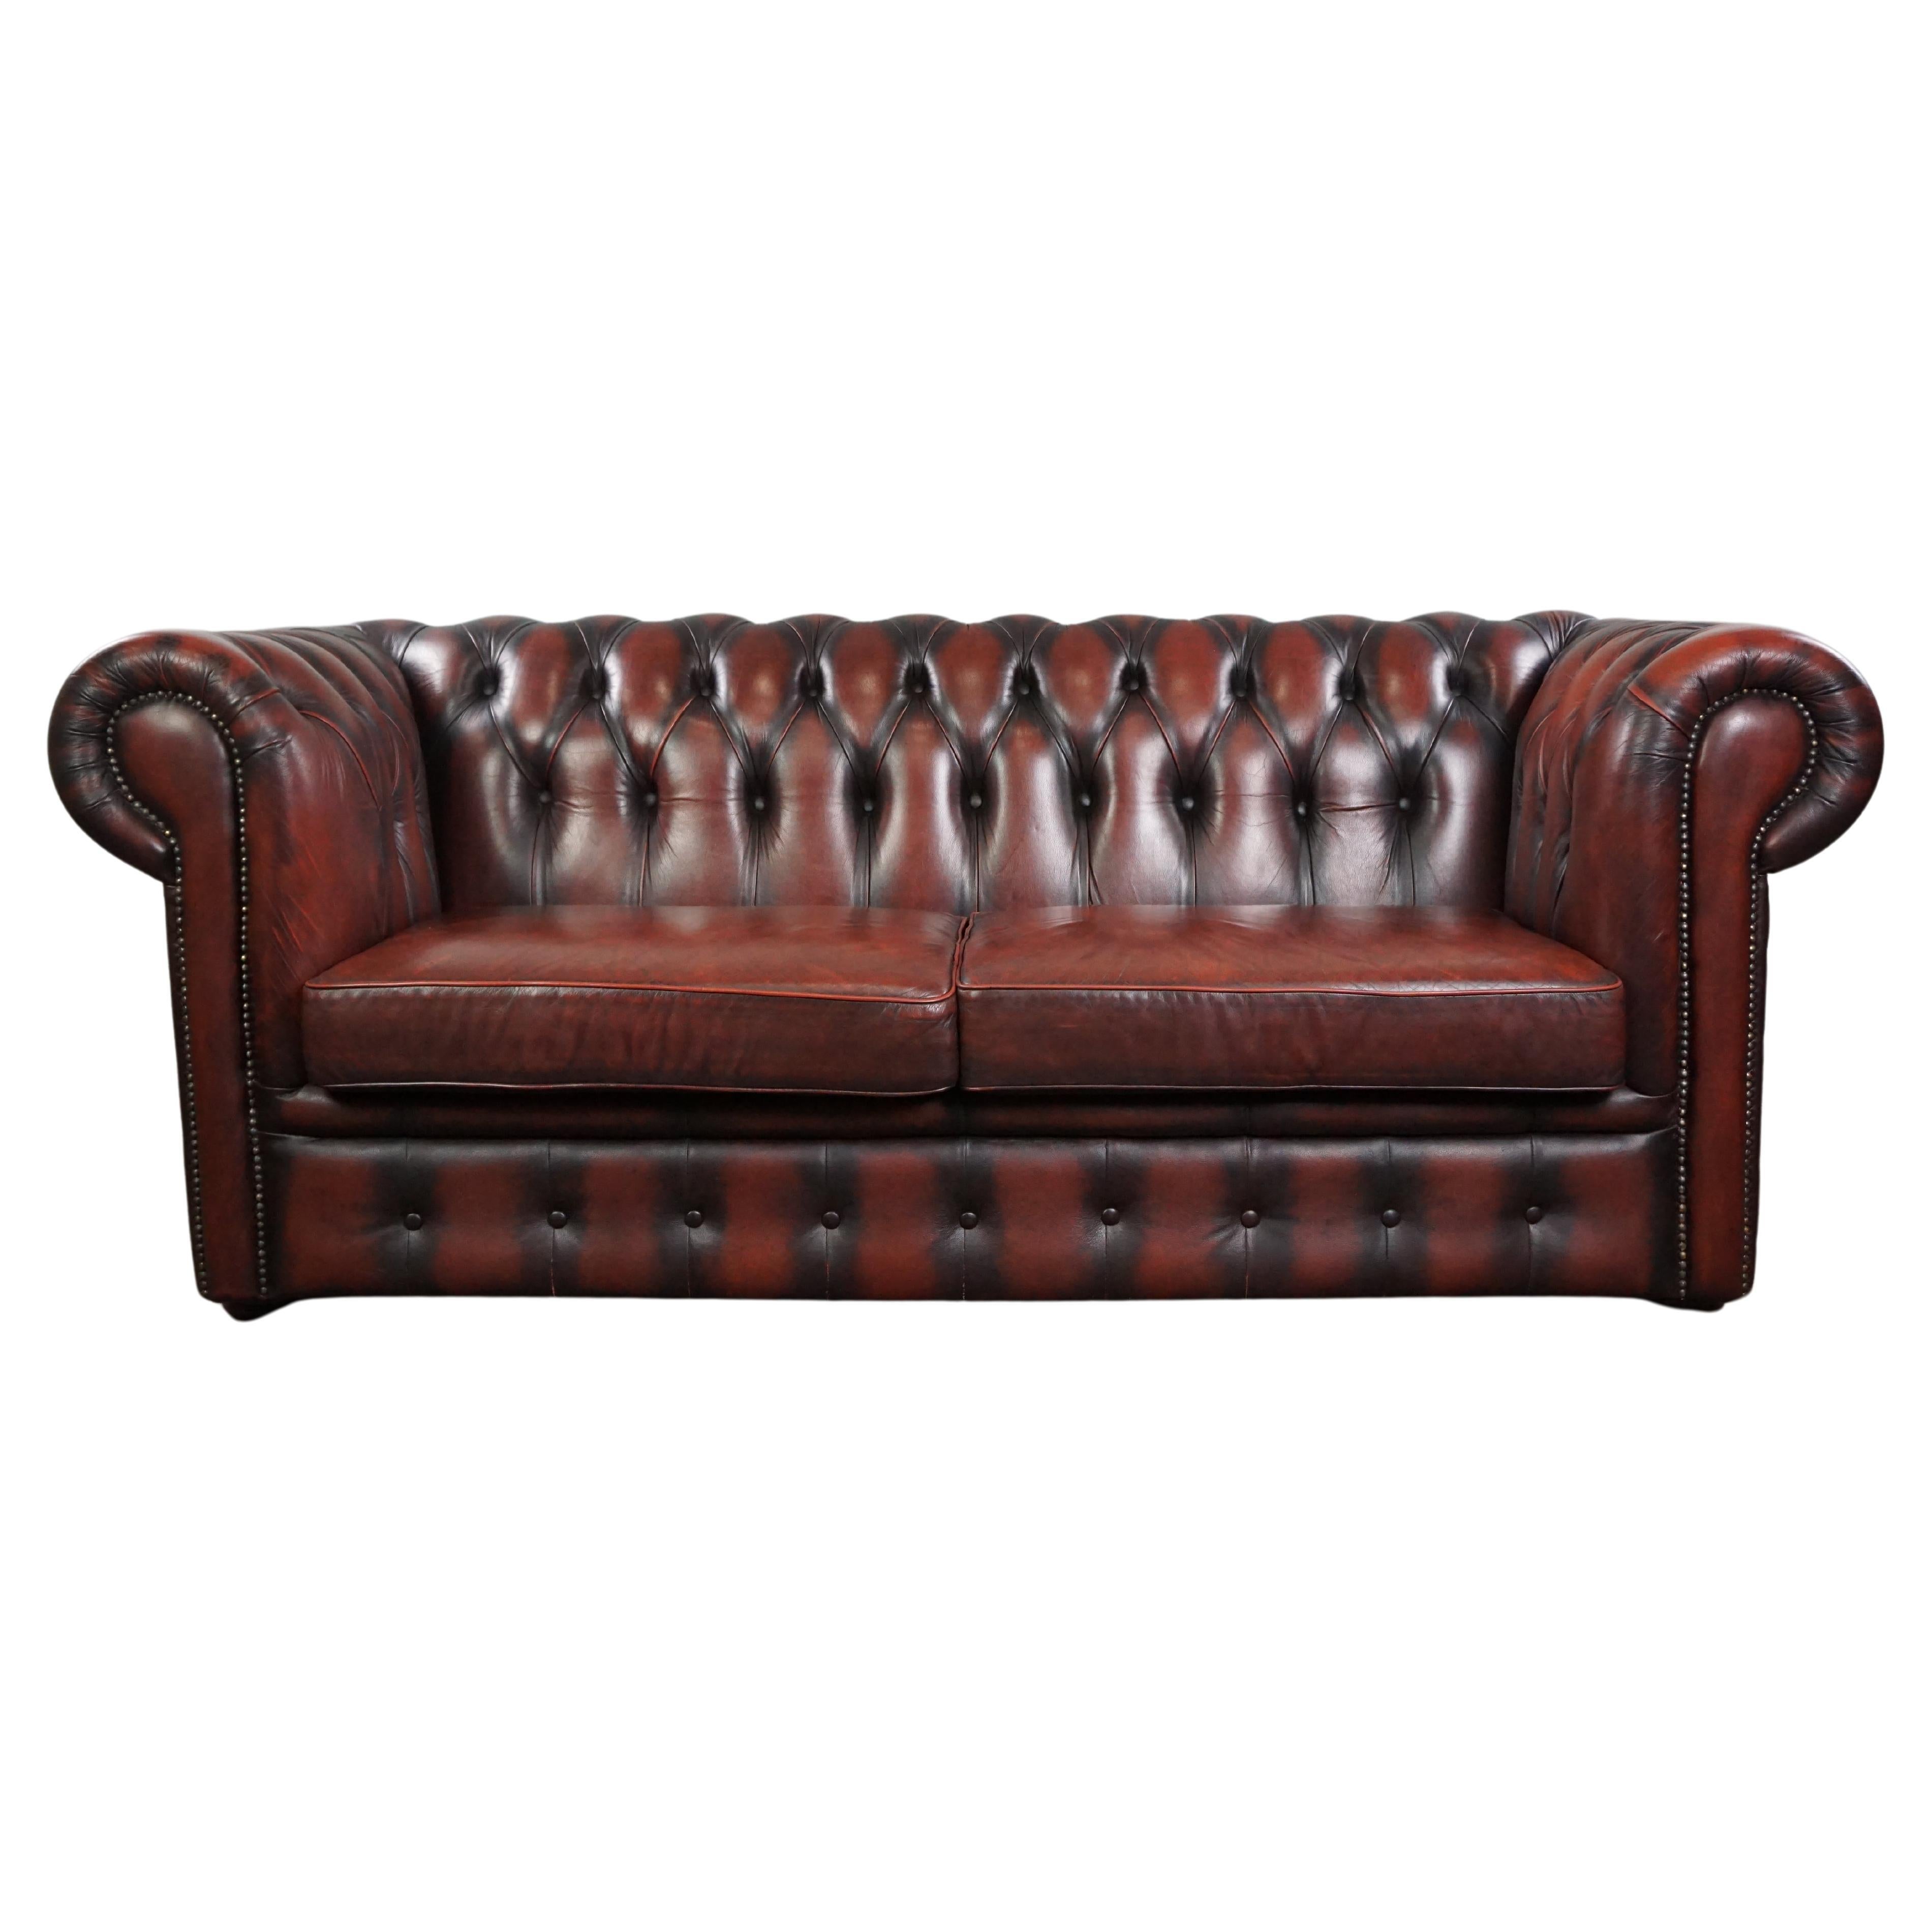 Insanely colored red cow leather Chesterfield sofa, spacious 2 seater For Sale